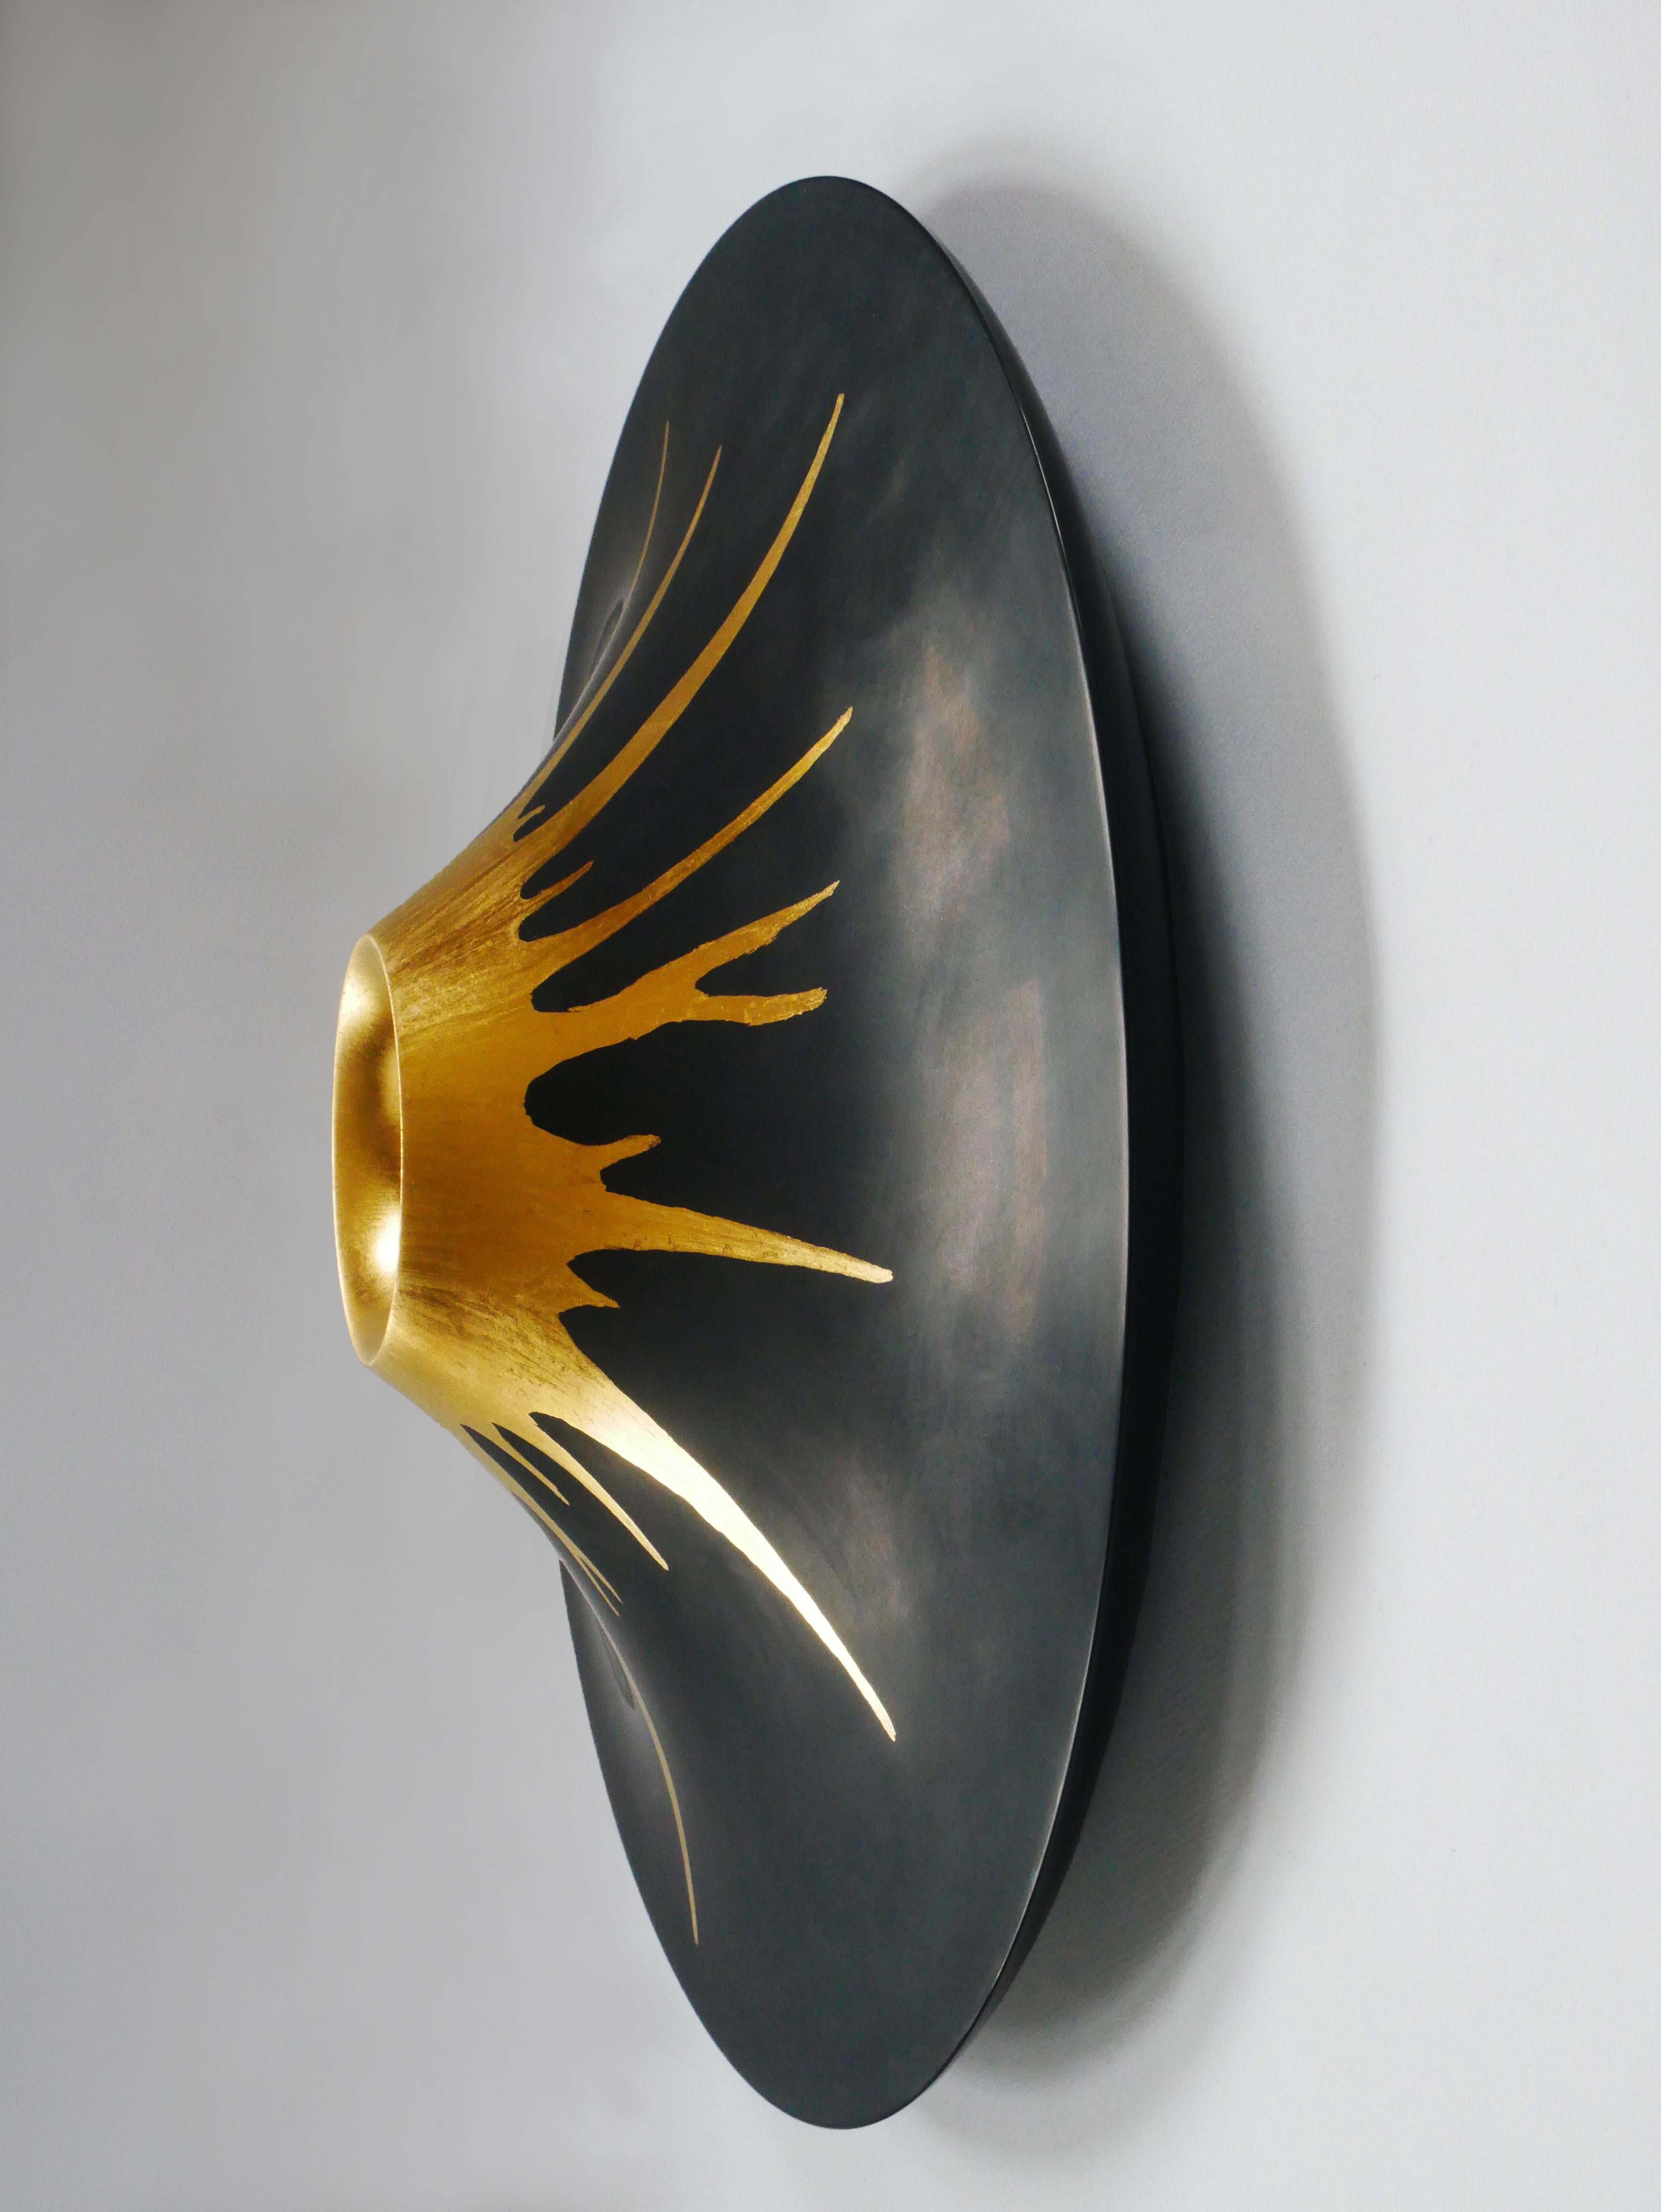 Minimalist Lacquered Wood and Gold Mirror Sculpture, Volcano